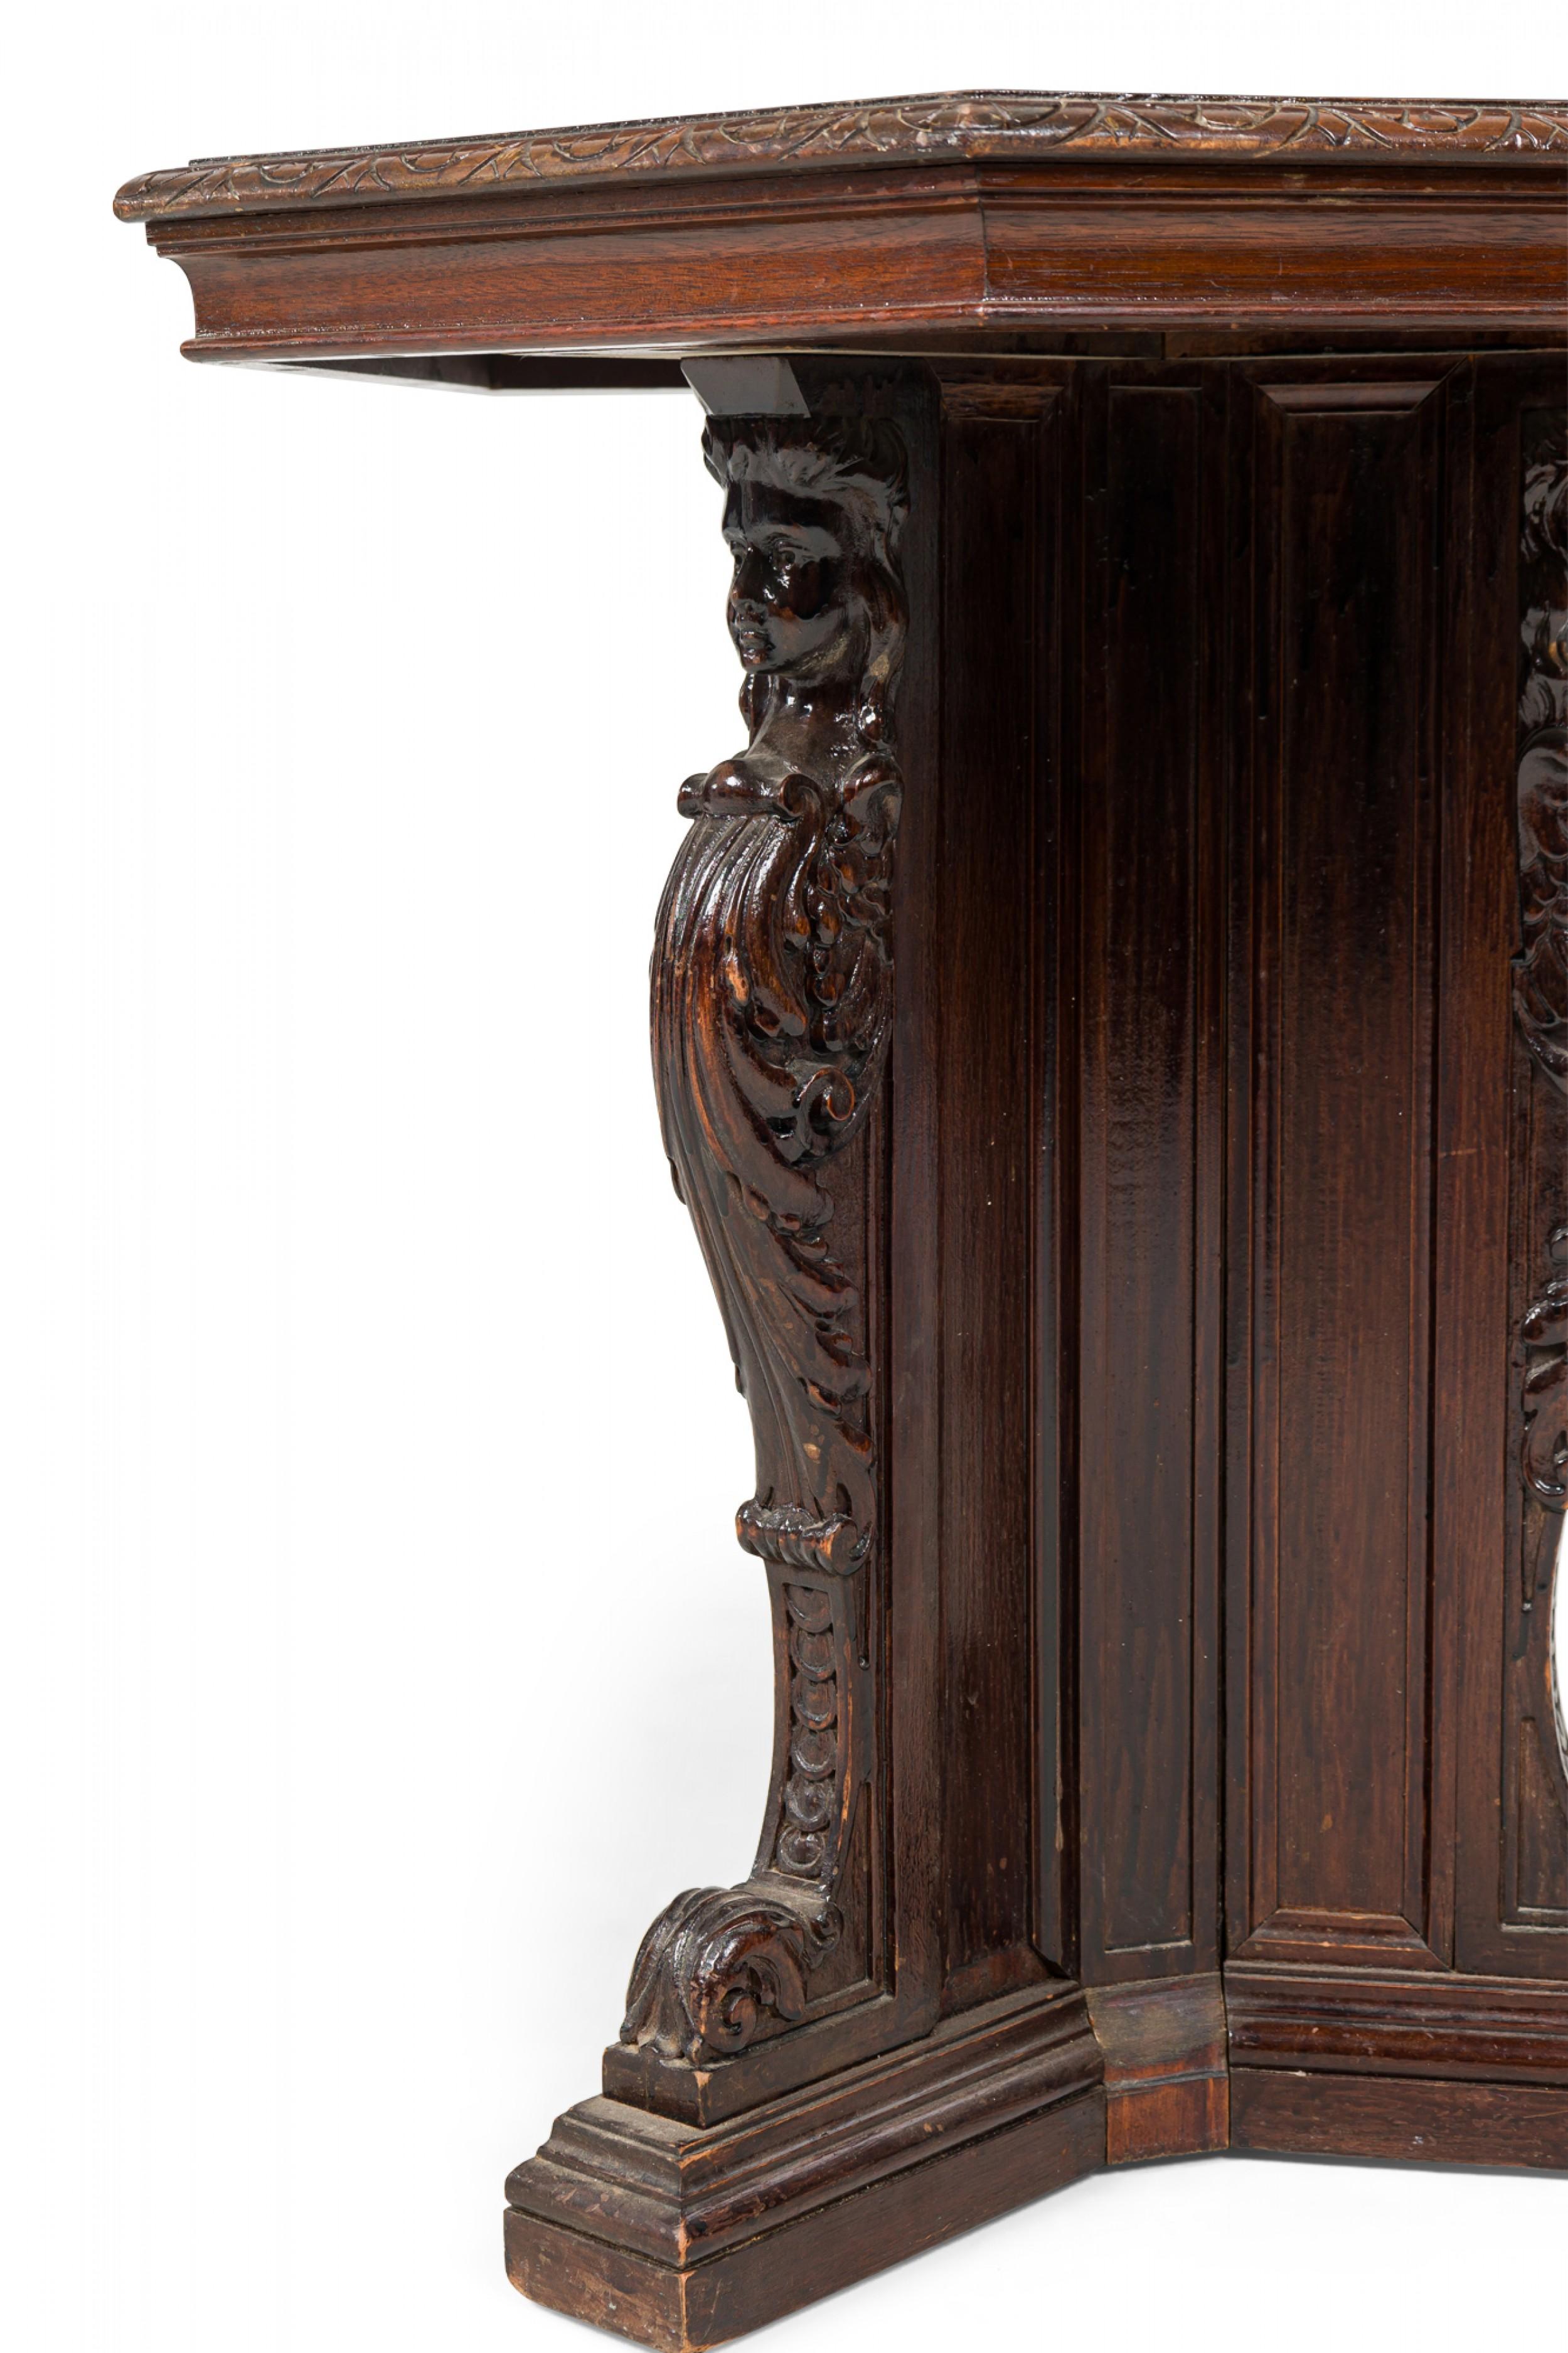 English Victorian-style hexagonal occasional / end table with carved edges, resting on a four leg pedestal base with decorative scroll carving.